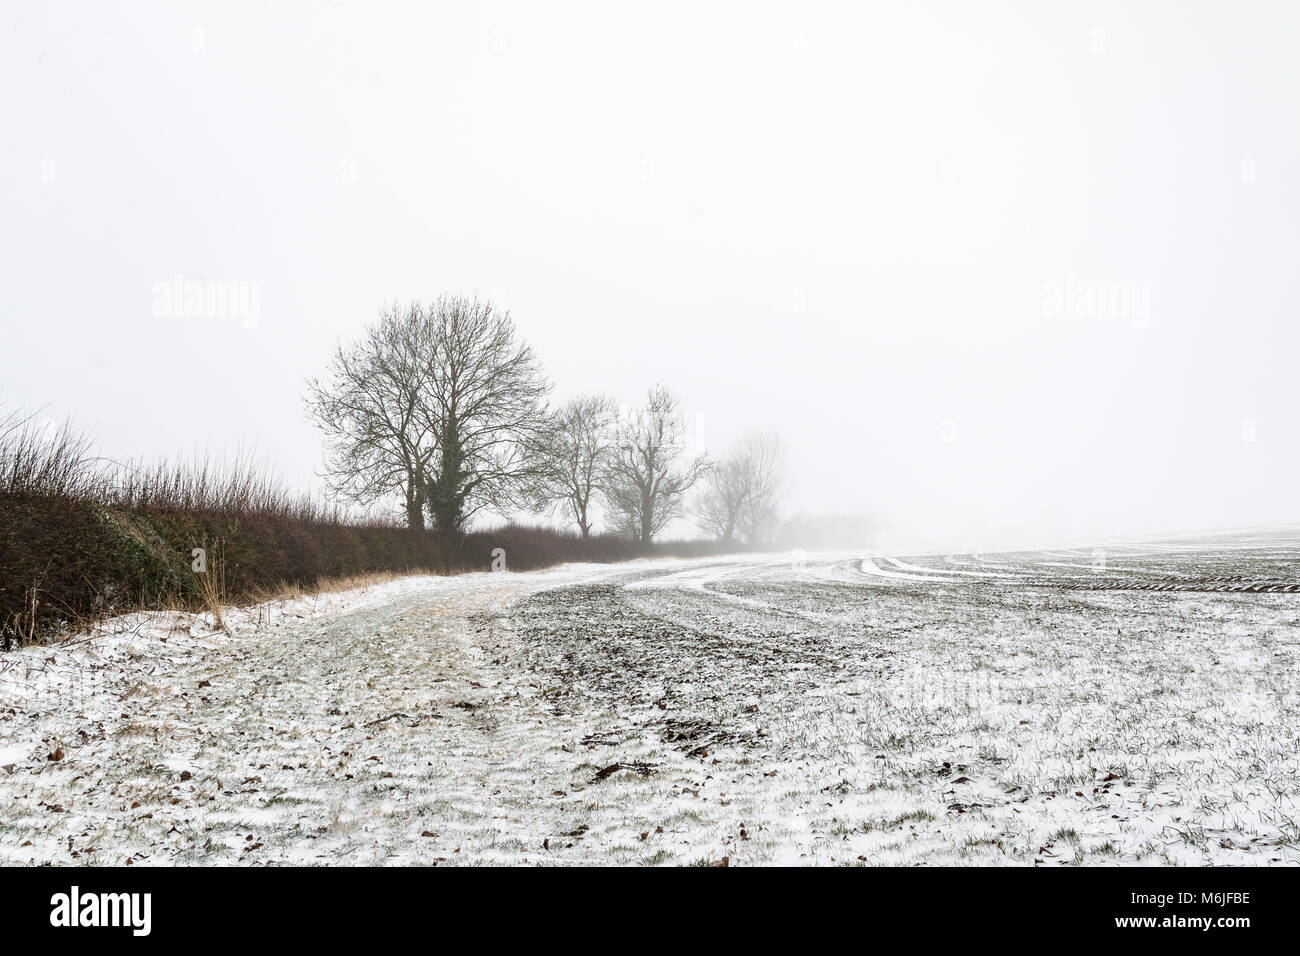 An image taken on a cold, misty morning, after several days of snow, in the fields near Kibworth Harcourt, Leicestershire, England, UK Stock Photo